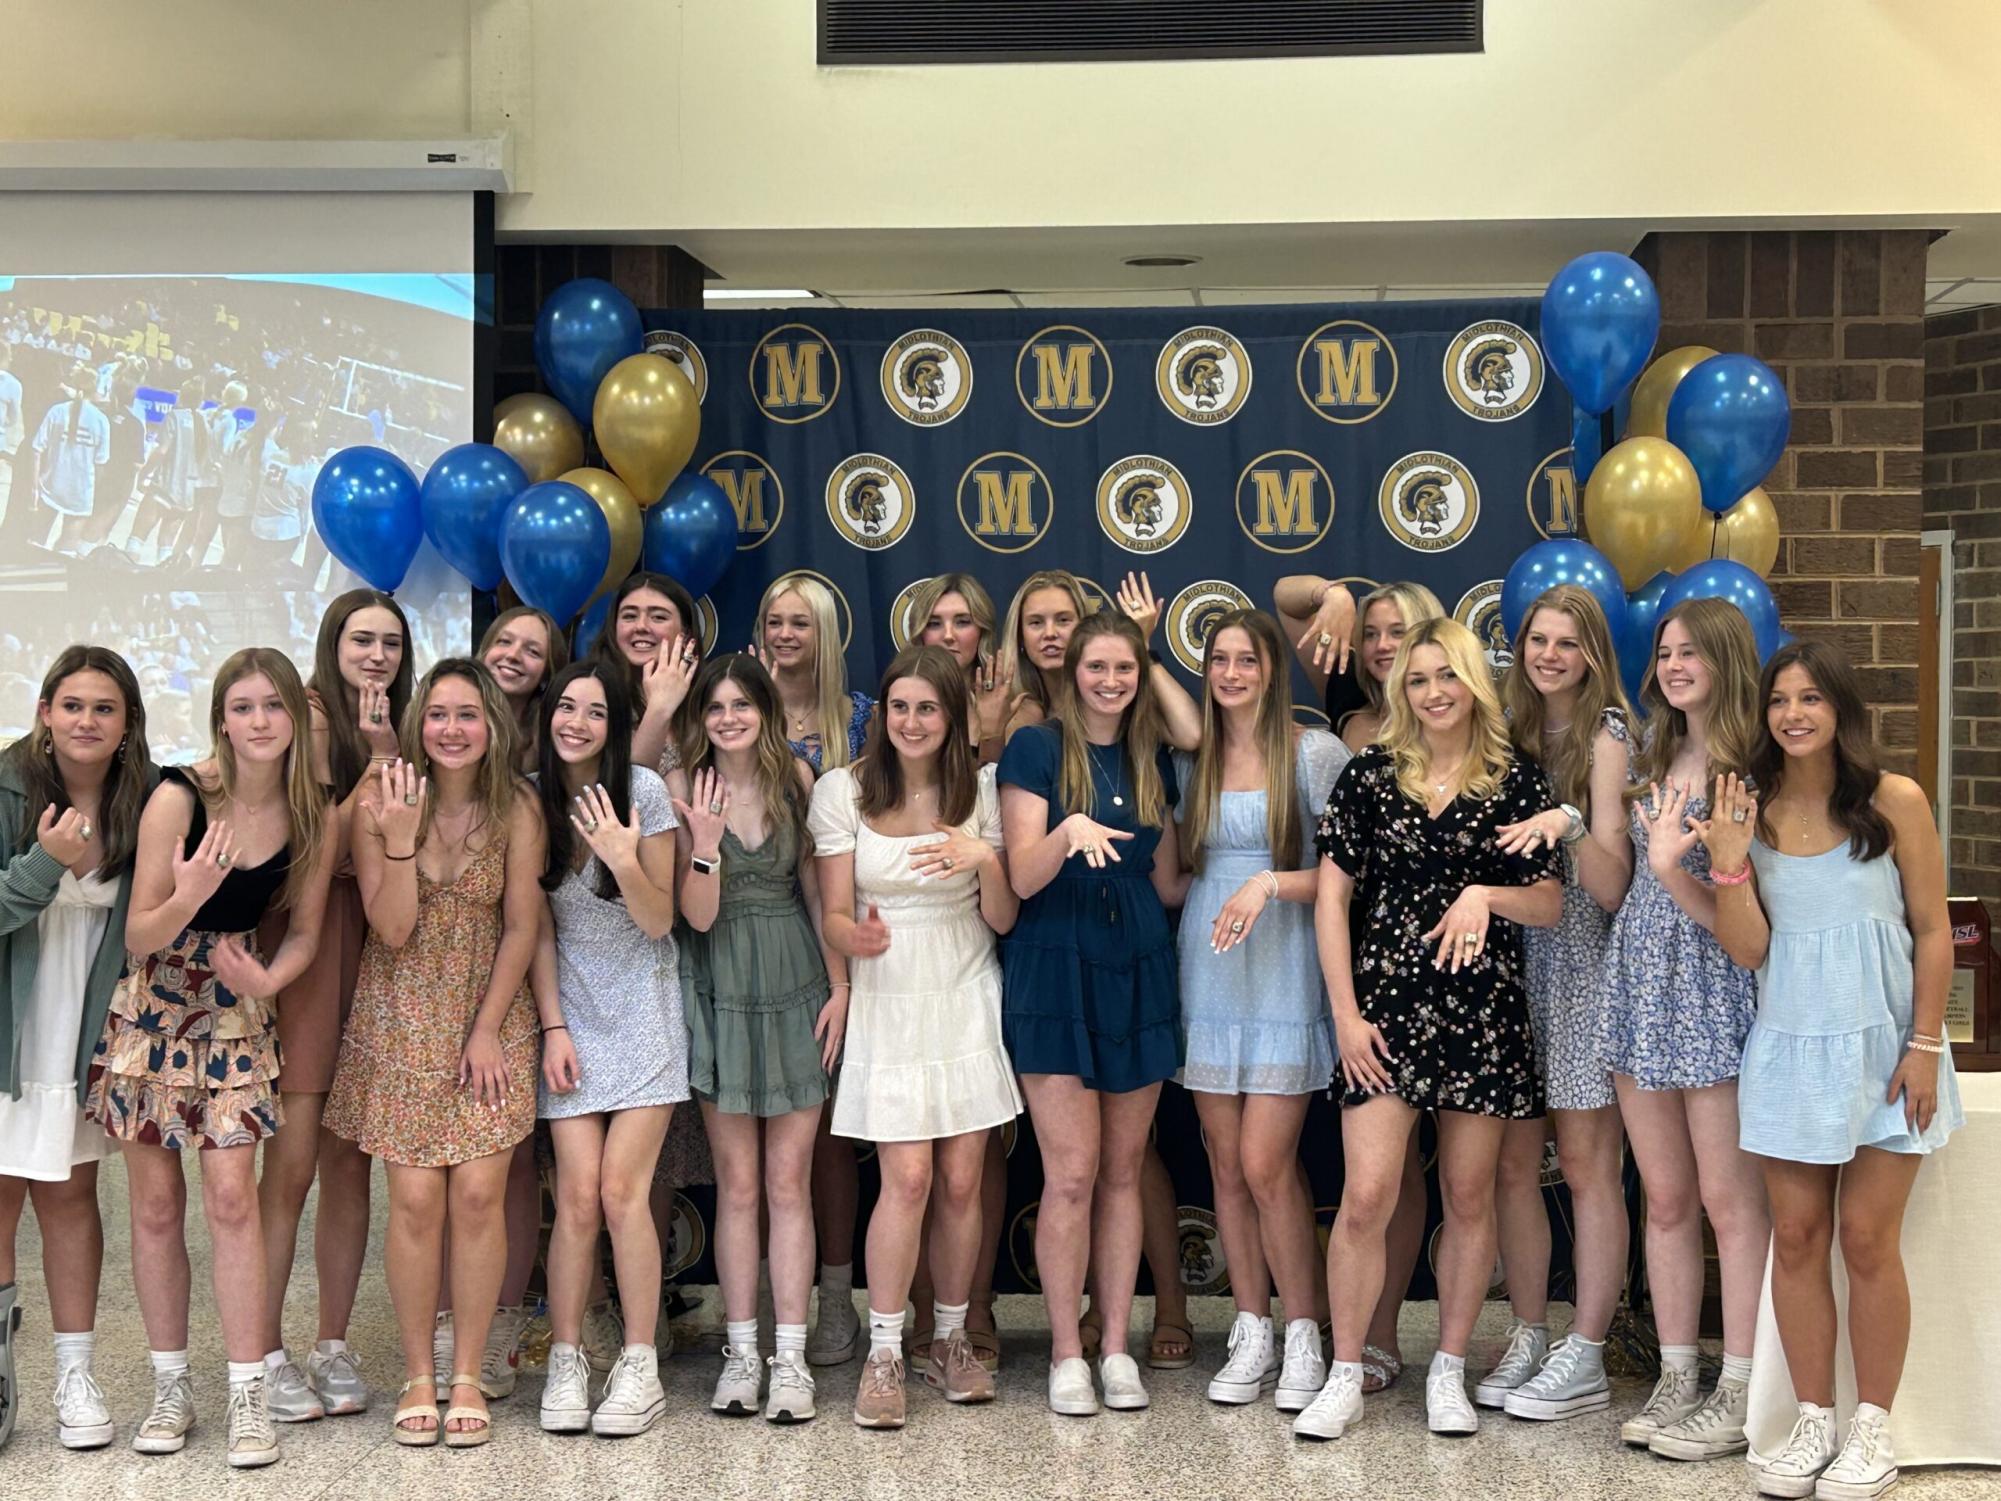 Girls Volleyball taking a team picture with their championship rings during an April ceremony.